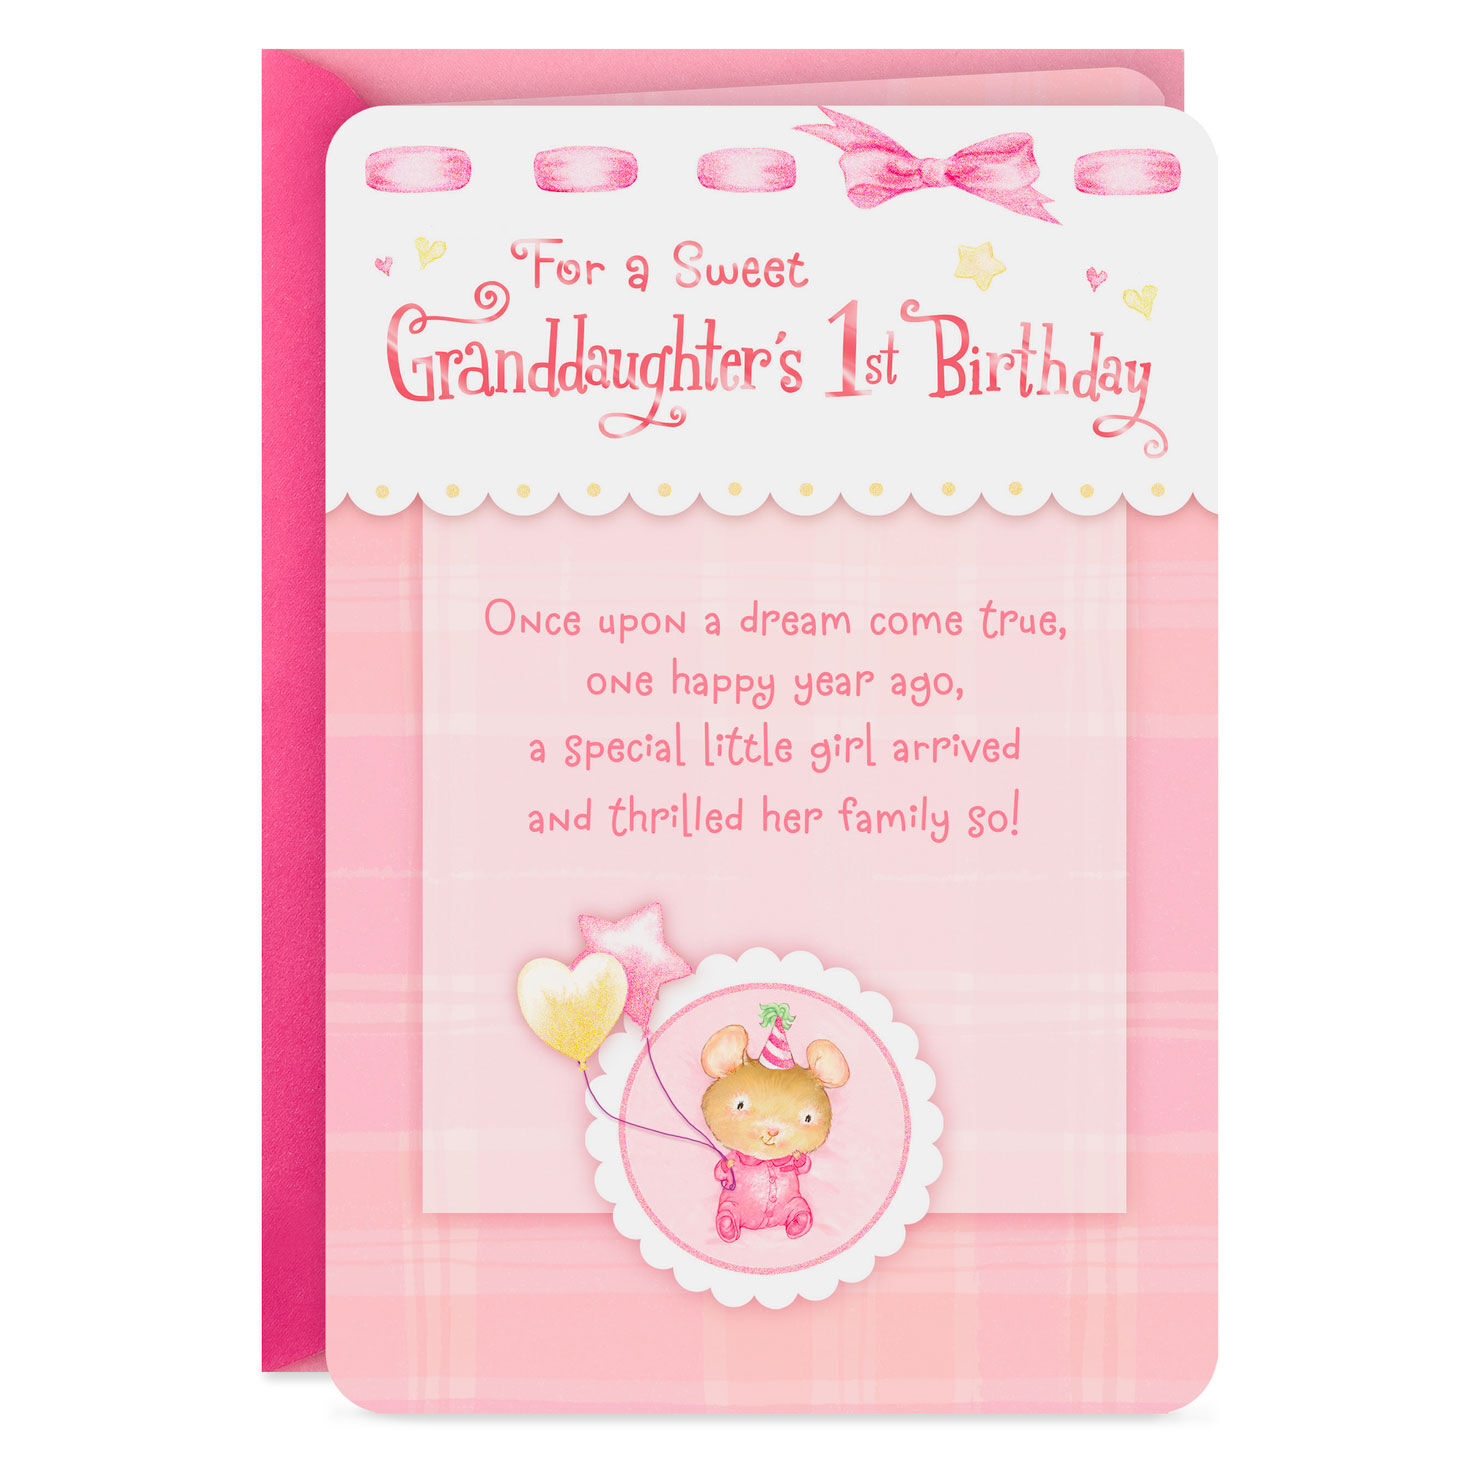 New Hallmark Happy Birthday To Granddaughter Greeting Card adorable 